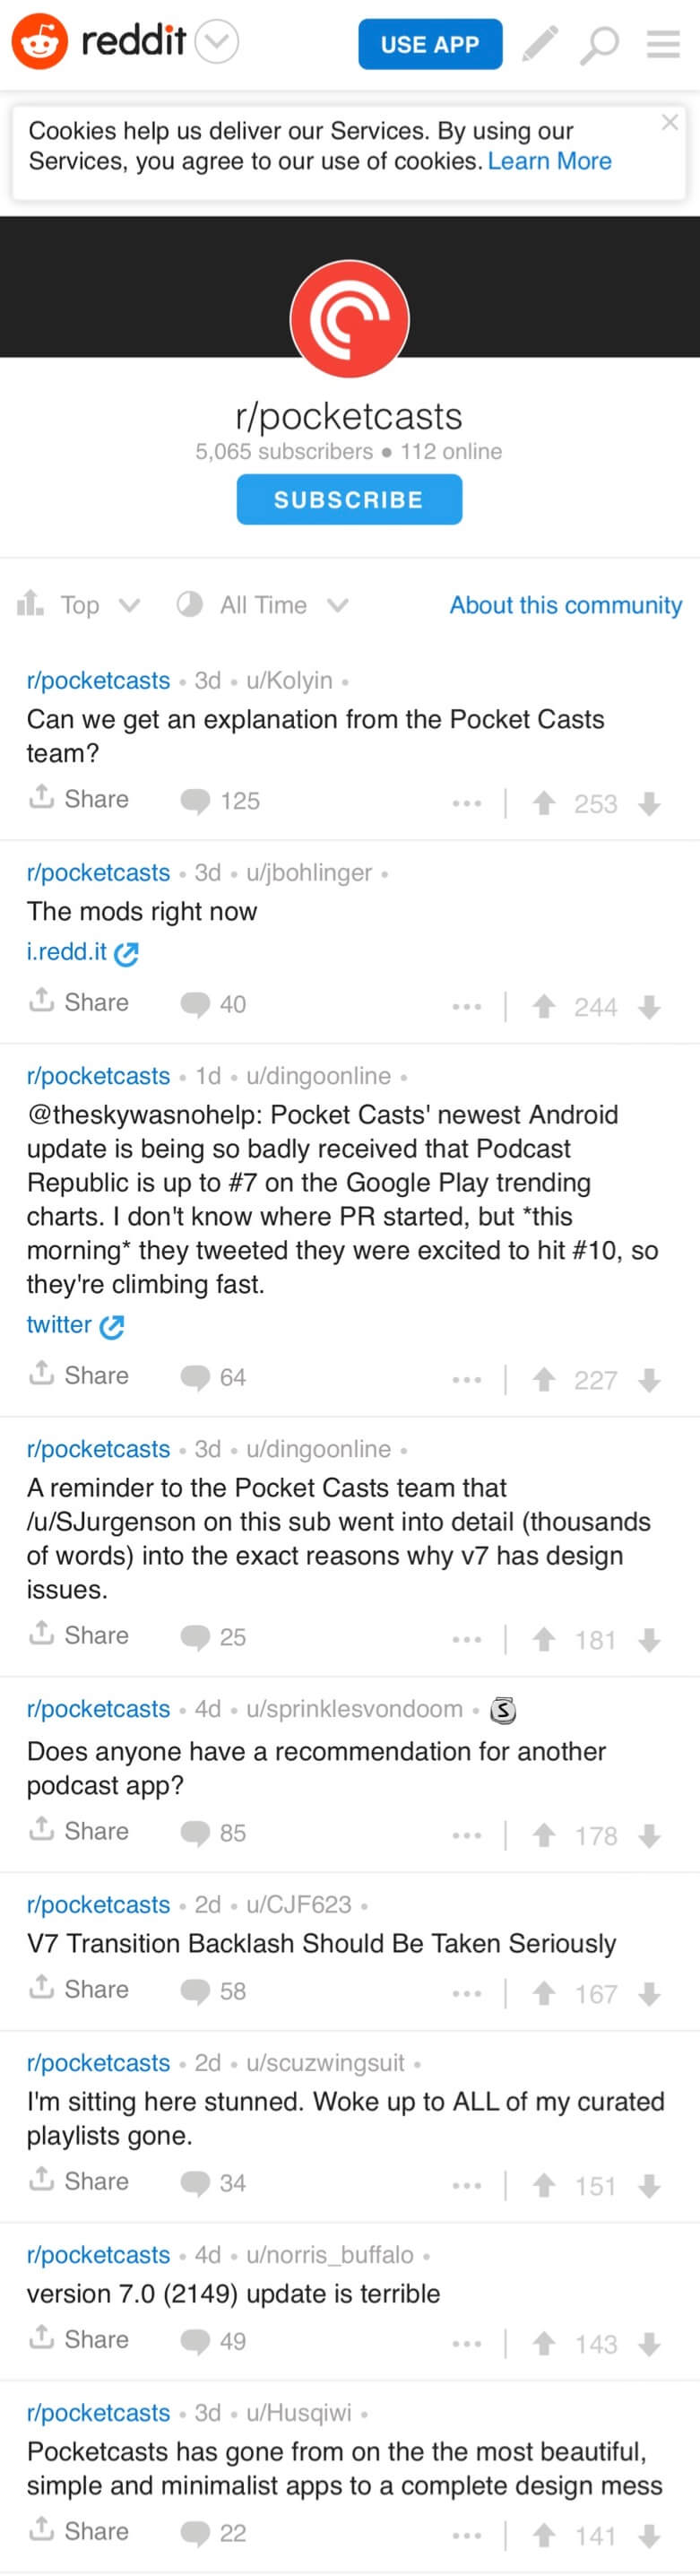 The top 10 posts in r/pocketcasts on March 10, 2019.